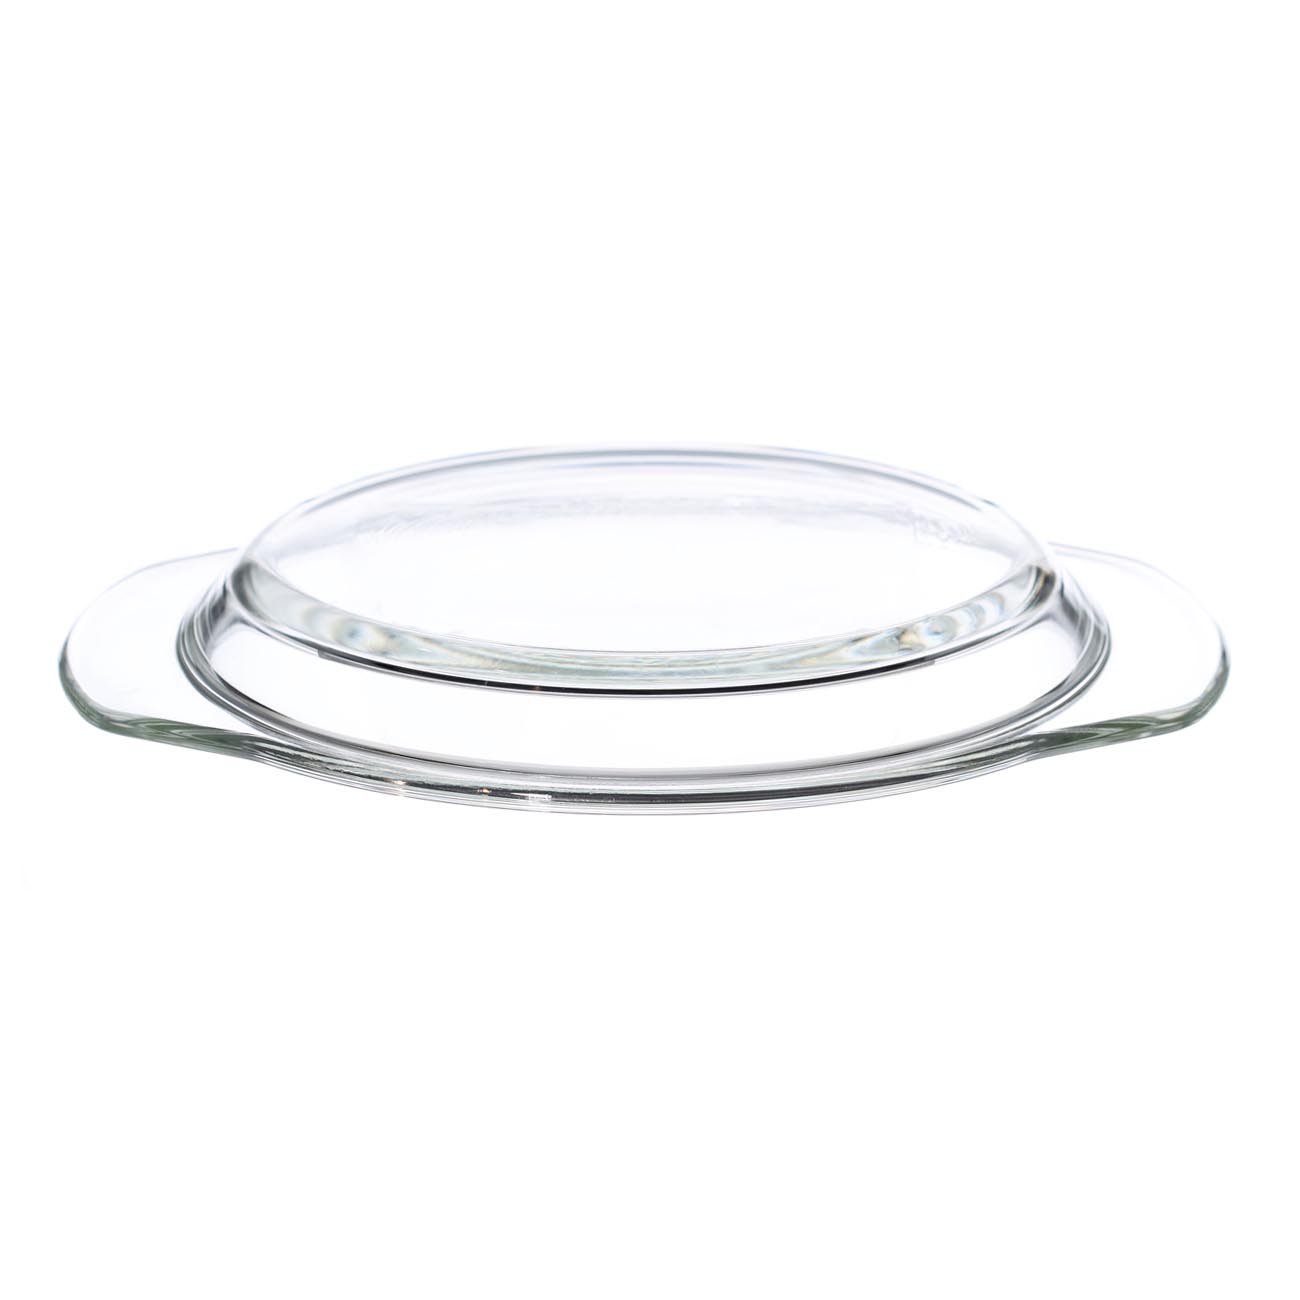 Baking dish, 17 cm, 1 l, with lid, Glass T, round, Cook изображение № 4